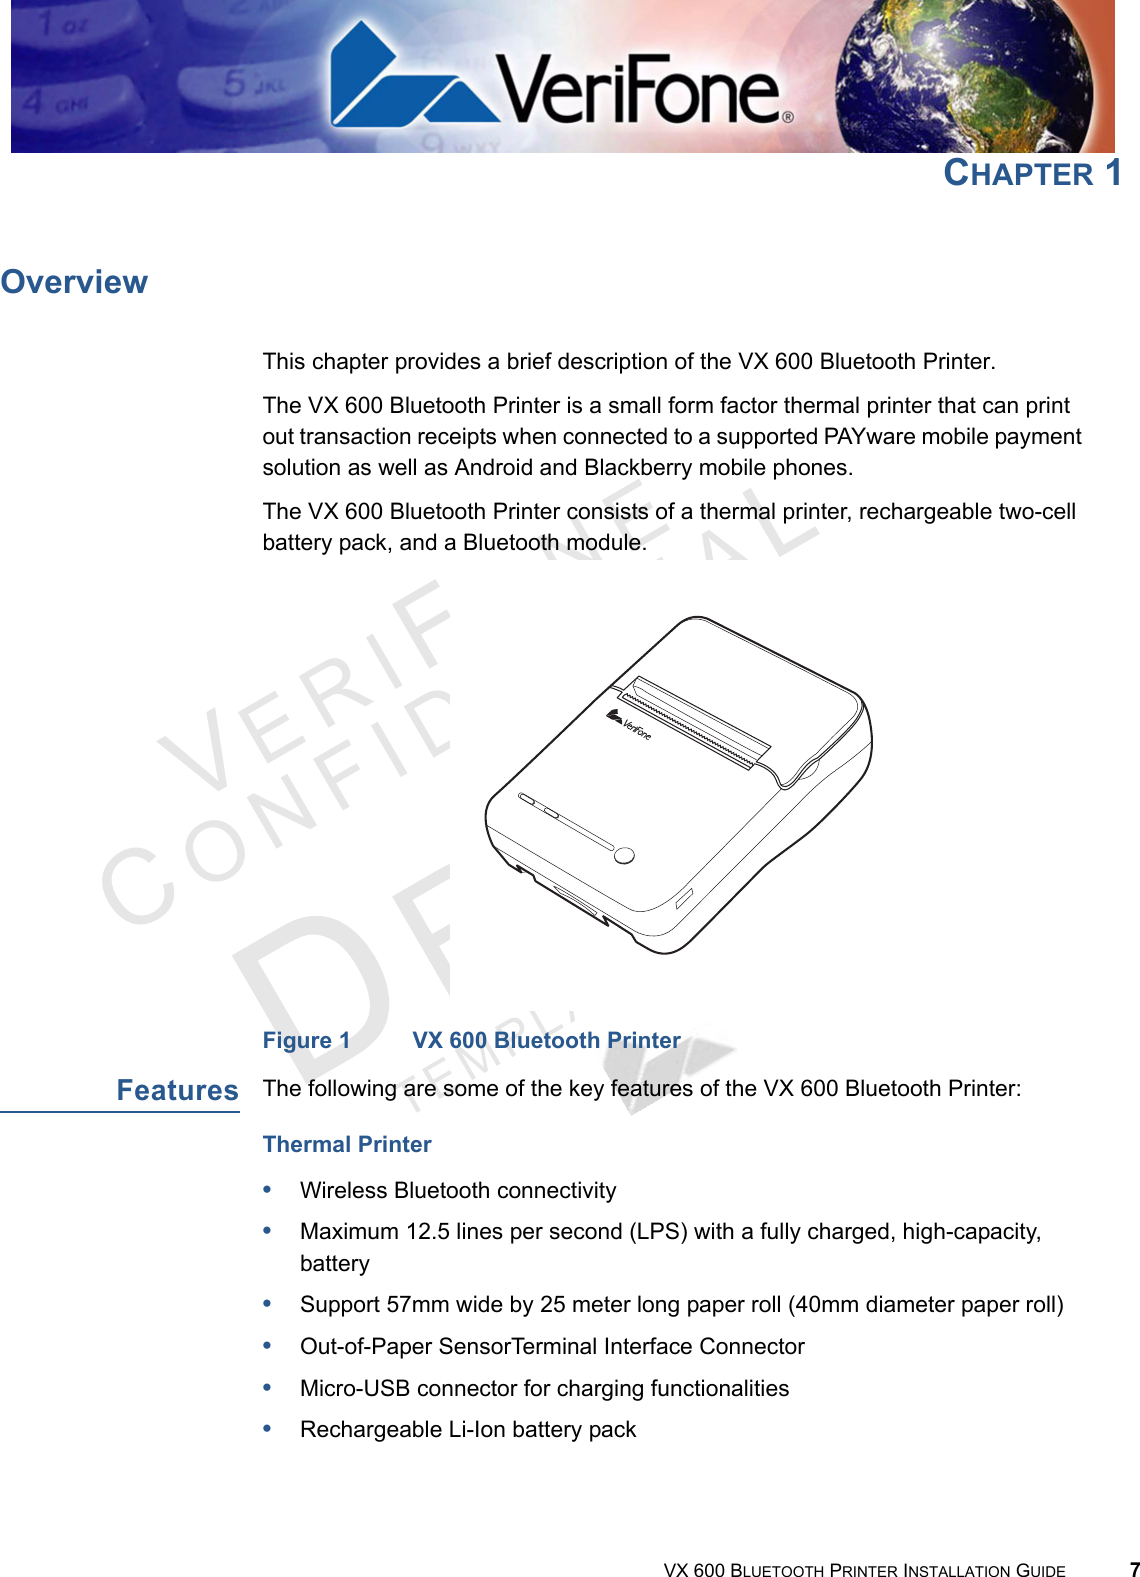 VERIFONECONFID E N T IALTEMPLATE REV F VX 600 BLUETOOTH PRINTER INSTALLATION GUIDE 7CHAPTER 1OverviewThis chapter provides a brief description of the VX 600 Bluetooth Printer.The VX 600 Bluetooth Printer is a small form factor thermal printer that can print out transaction receipts when connected to a supported PAYware mobile payment solution as well as Android and Blackberry mobile phones. The VX 600 Bluetooth Printer consists of a thermal printer, rechargeable two-cell battery pack, and a Bluetooth module.Figure 1 VX 600 Bluetooth PrinterFeaturesThe following are some of the key features of the VX 600 Bluetooth Printer:Thermal Printer•Wireless Bluetooth connectivity•Maximum 12.5 lines per second (LPS) with a fully charged, high-capacity, battery•Support 57mm wide by 25 meter long paper roll (40mm diameter paper roll)•Out-of-Paper SensorTerminal Interface Connector•Micro-USB connector for charging functionalities•Rechargeable Li-Ion battery pack